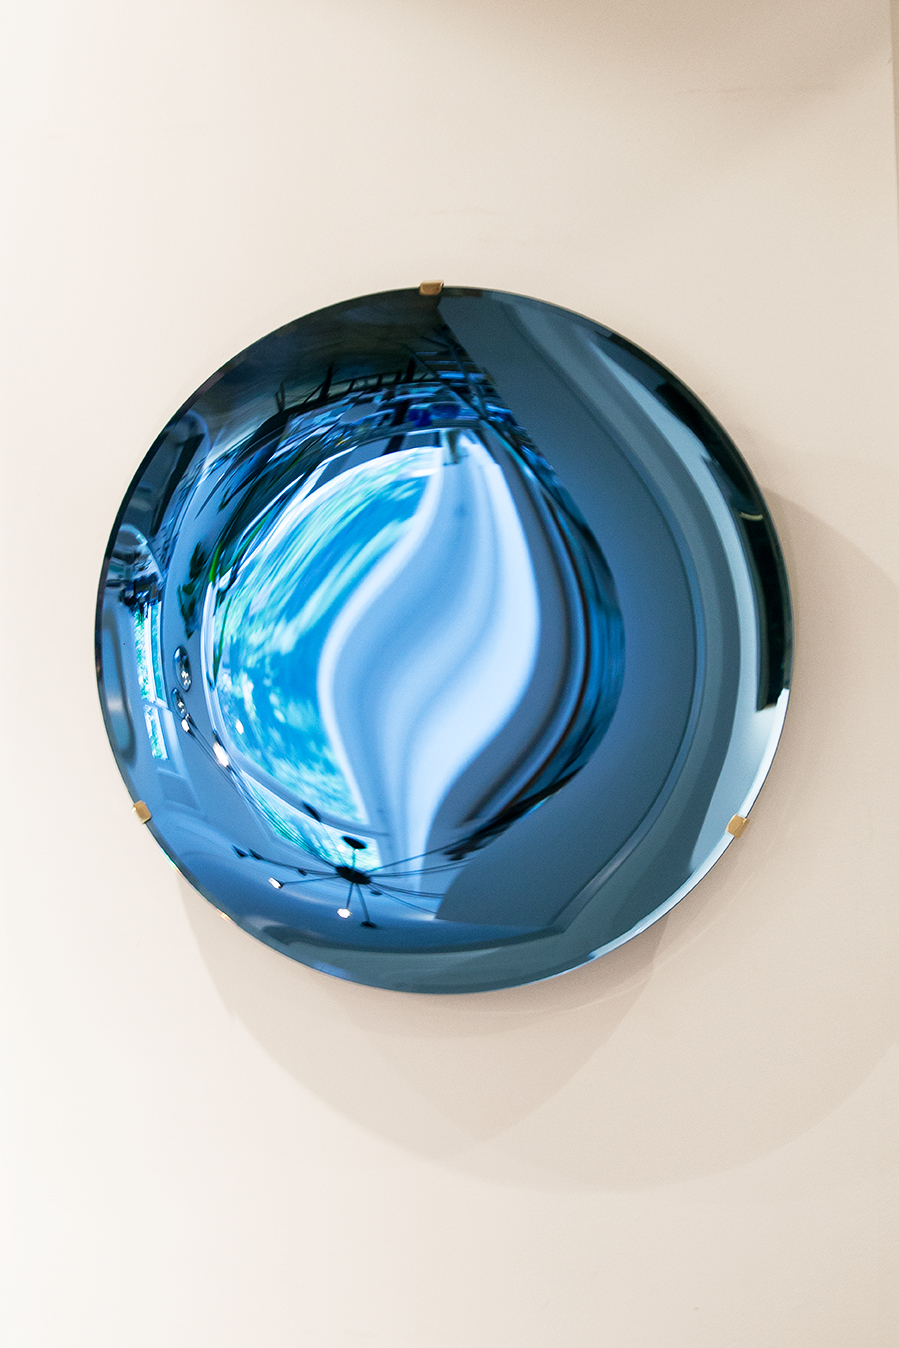 Concave blue Mirror Object, France 2020